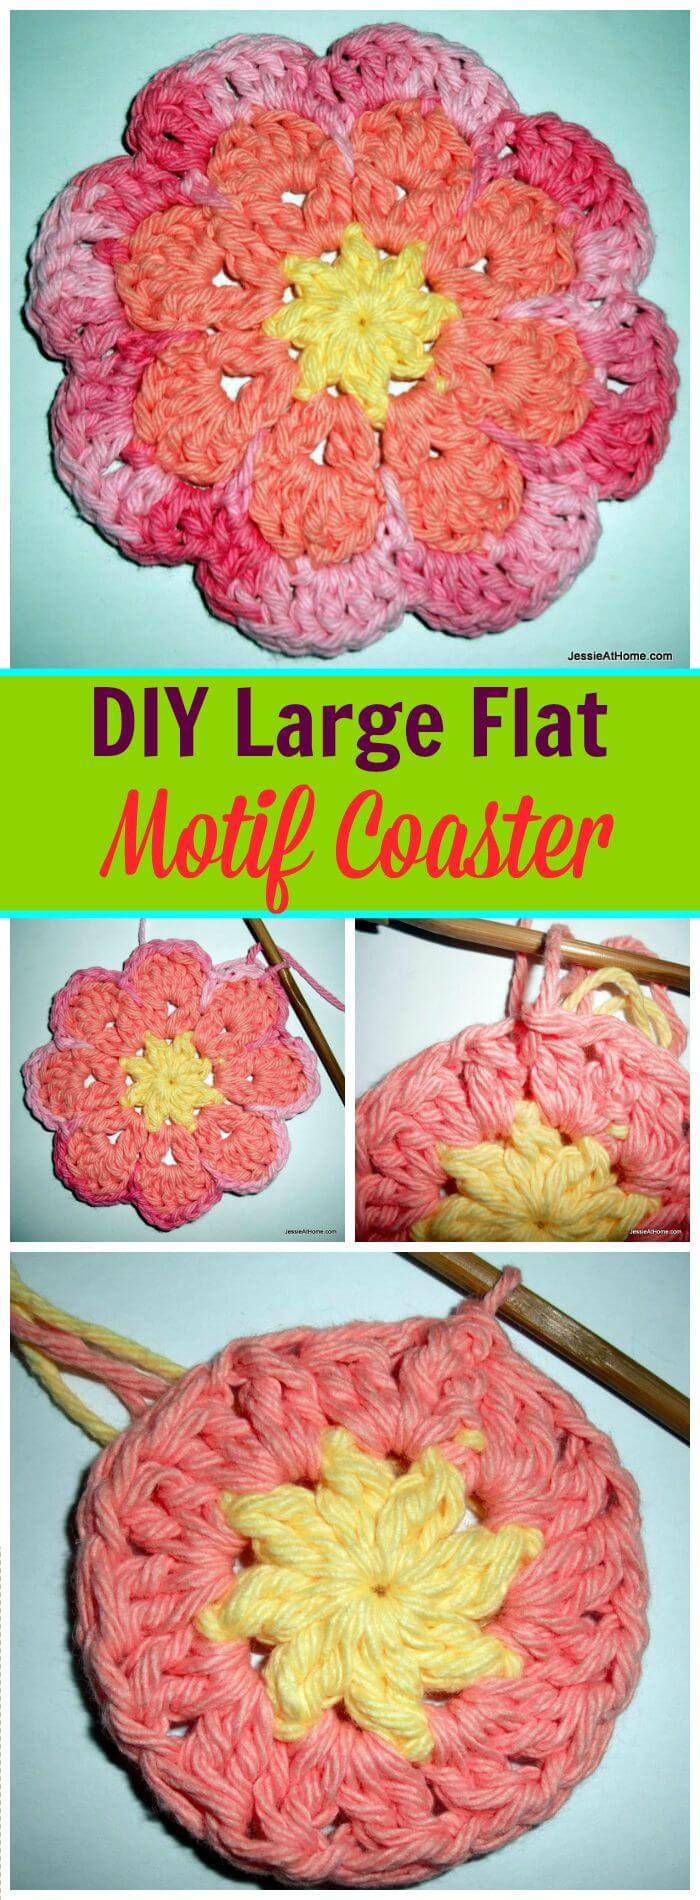 DIY Large Flat Flower Motif Coaster-Free Crochet Pattern, Free crochet flower patterns for crochet lovers! DIY projects about how to crochet flowers!